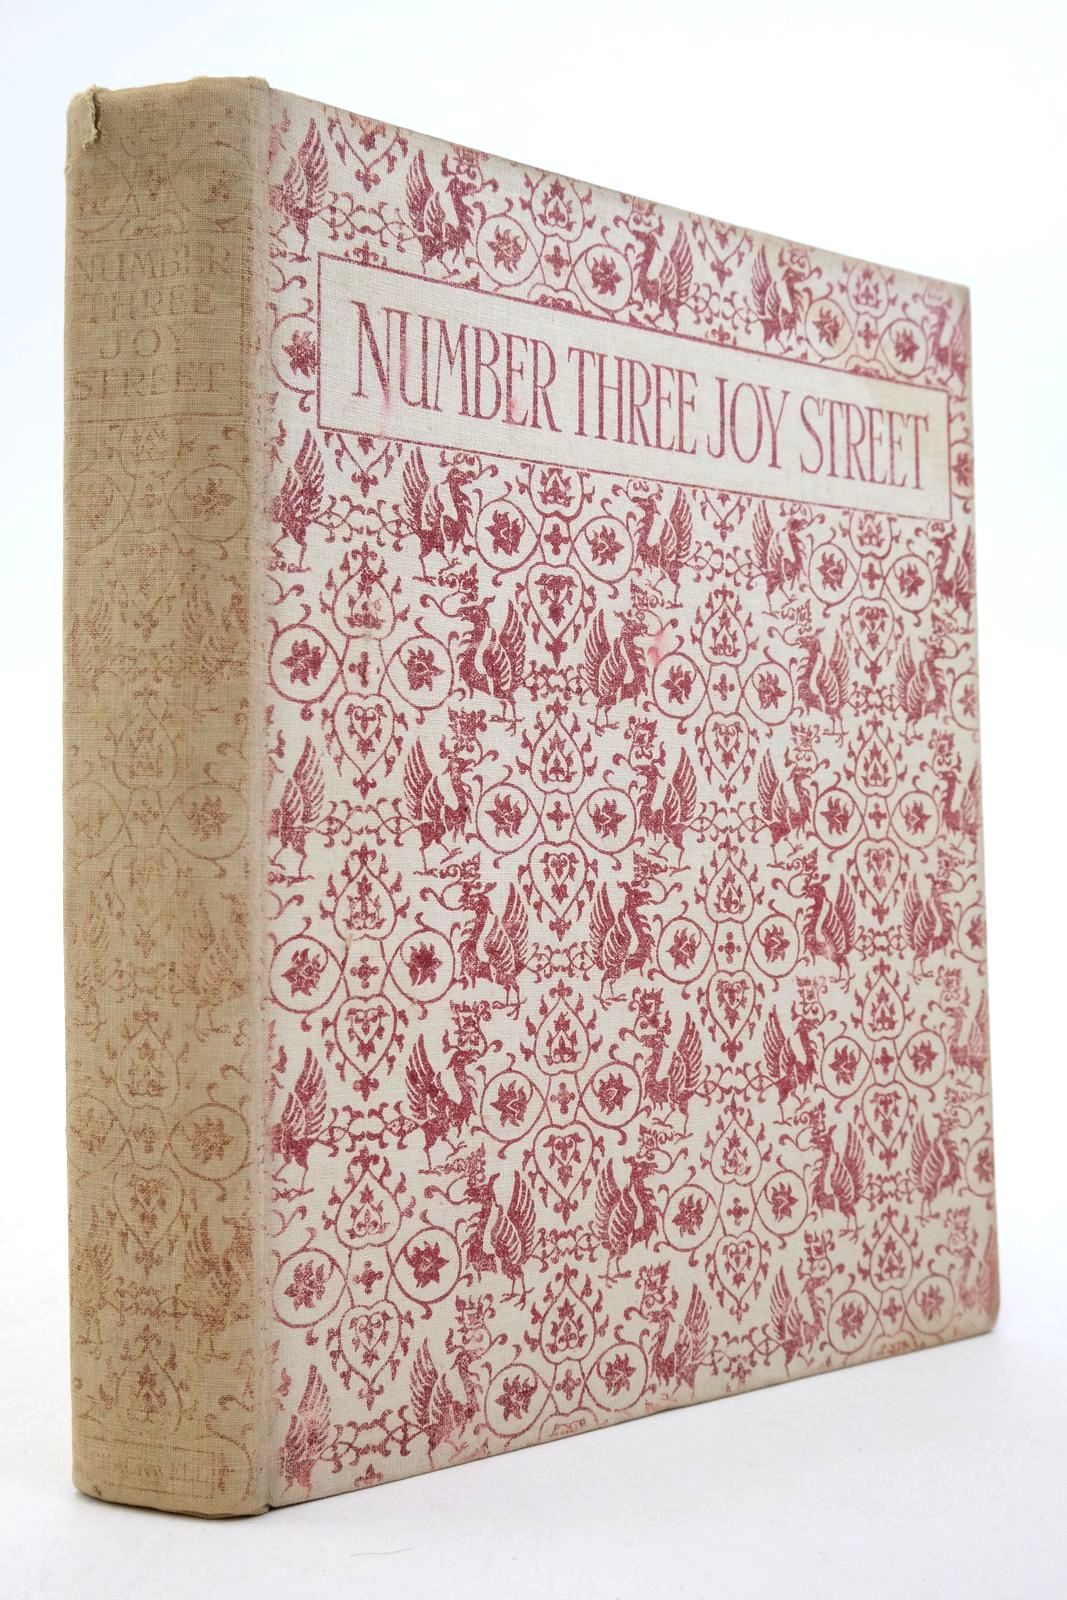 Photo of NUMBER THREE JOY STREET written by Armfield, Maxwell Fyleman, Rose Milne, A.A. Housman, Laurence et al,  illustrated by Hibbert, Vera Watson, A.H. Rountree, Harry et al.,  published by Basil Blackwell (STOCK CODE: 2140029)  for sale by Stella & Rose's Books